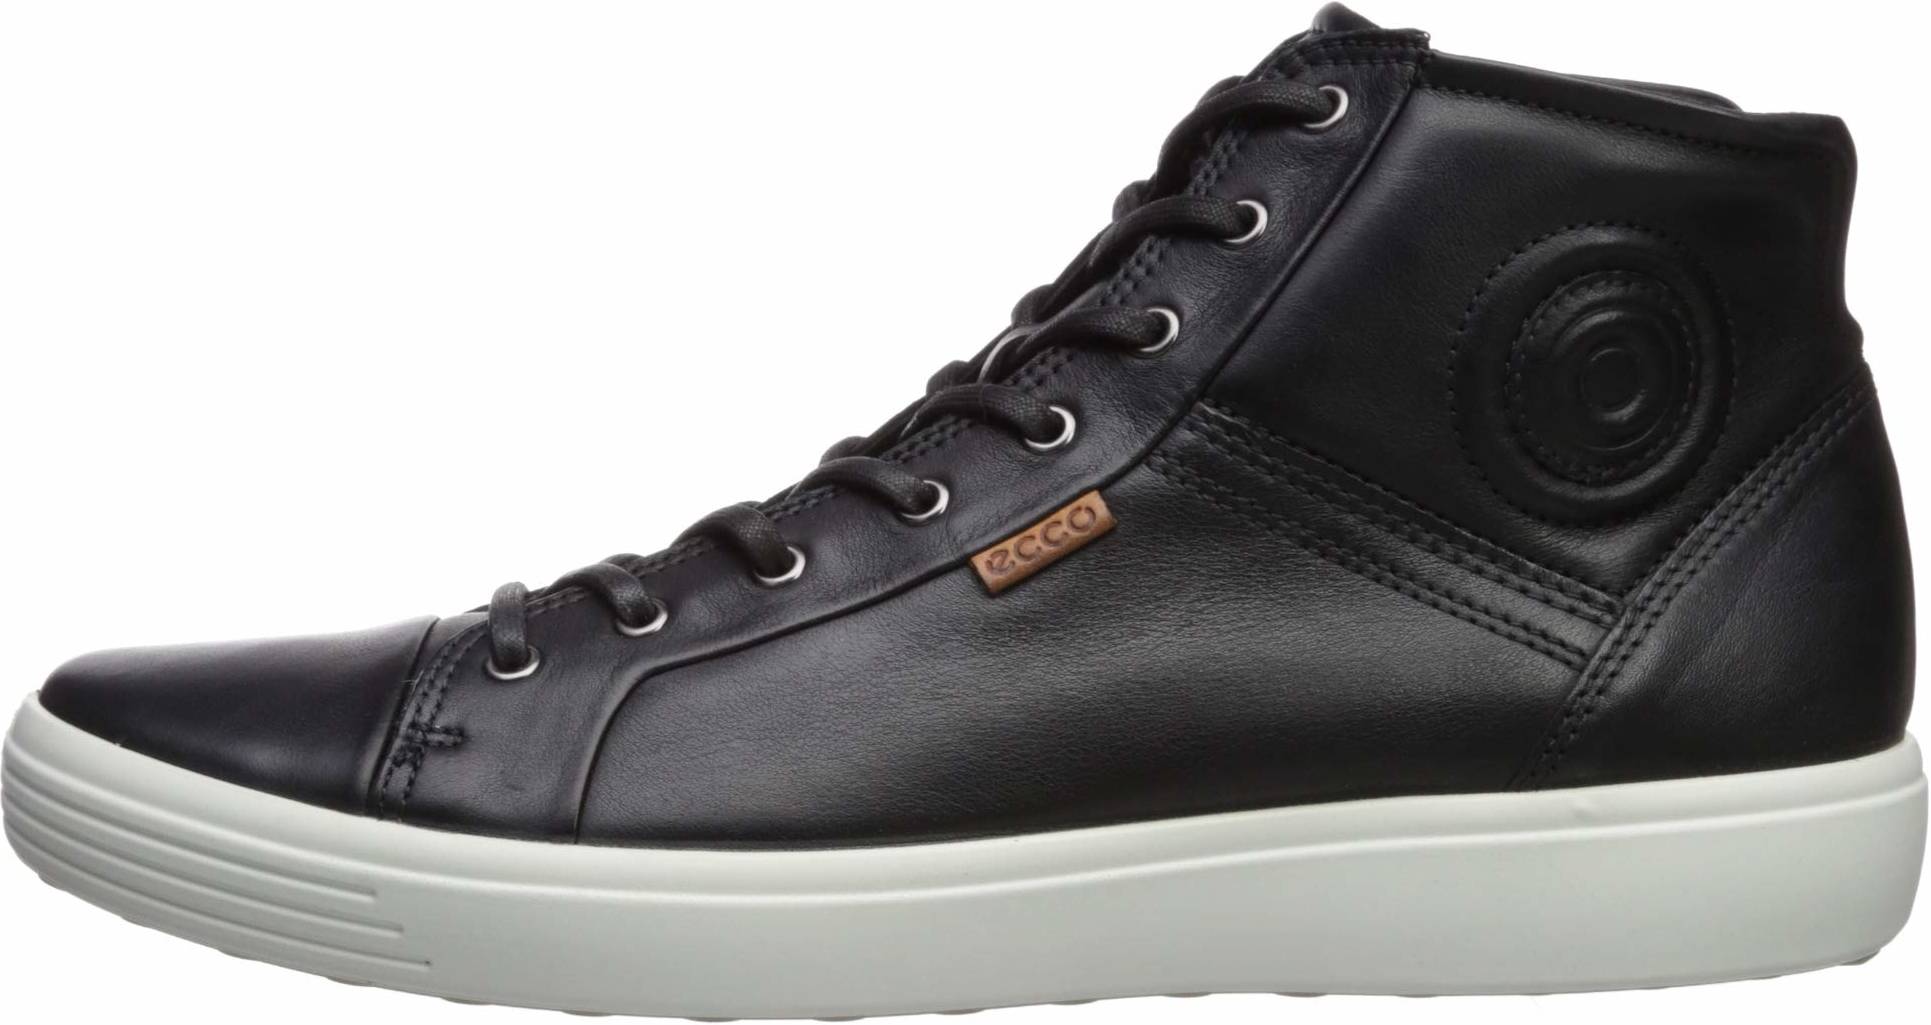 Save 43% on Ecco Sneakers (45 Models in 